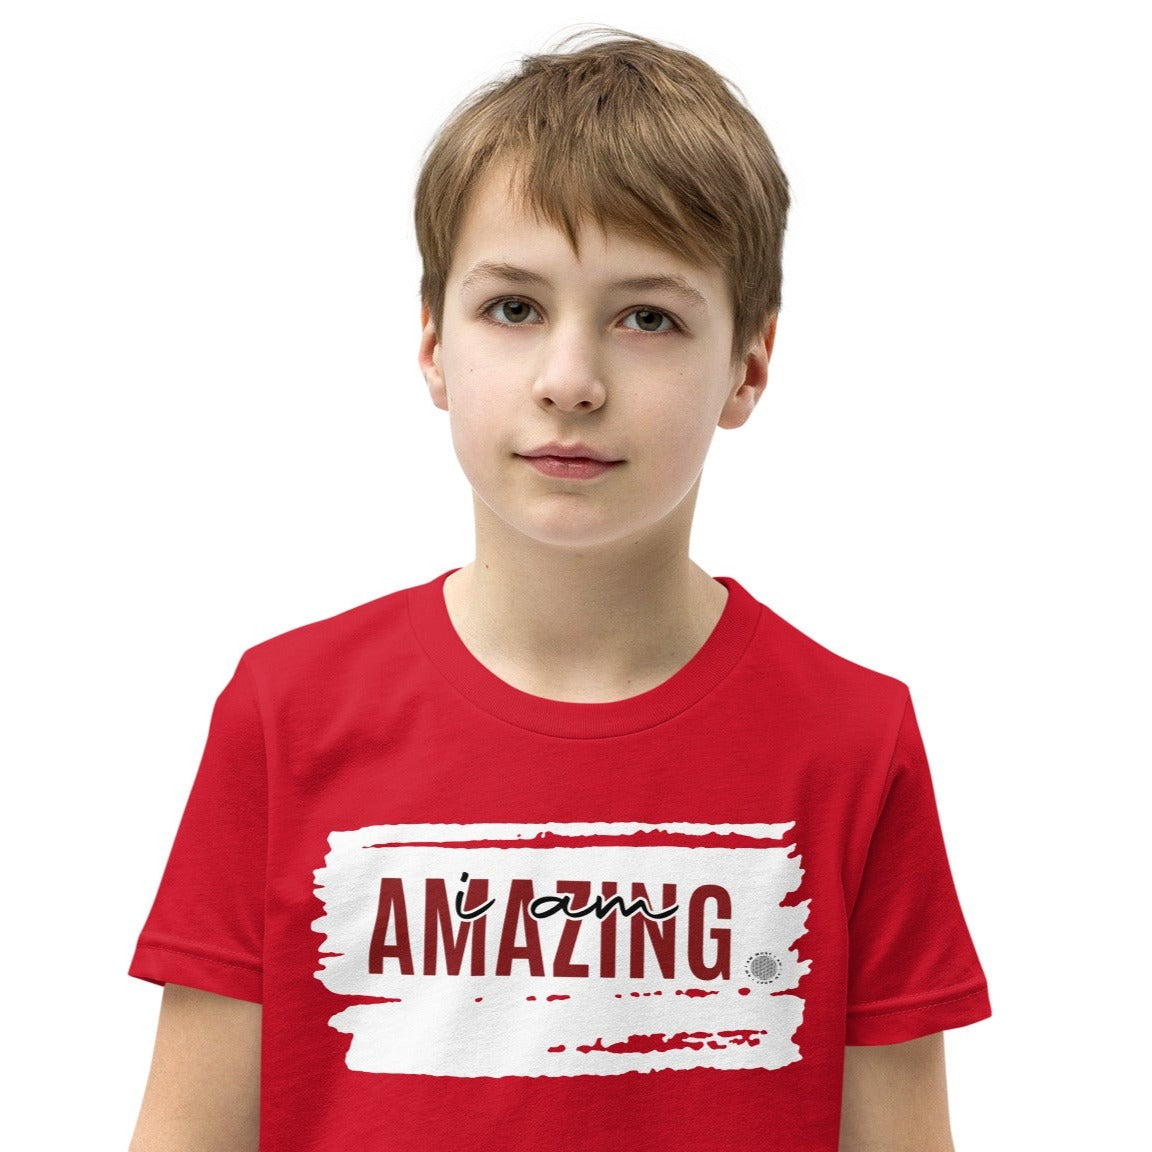 Our ‘I Am Amazing’ affirmation youth t-shirt is perfect for your son or daughter. Your child is sure to do some breathtaking feats.